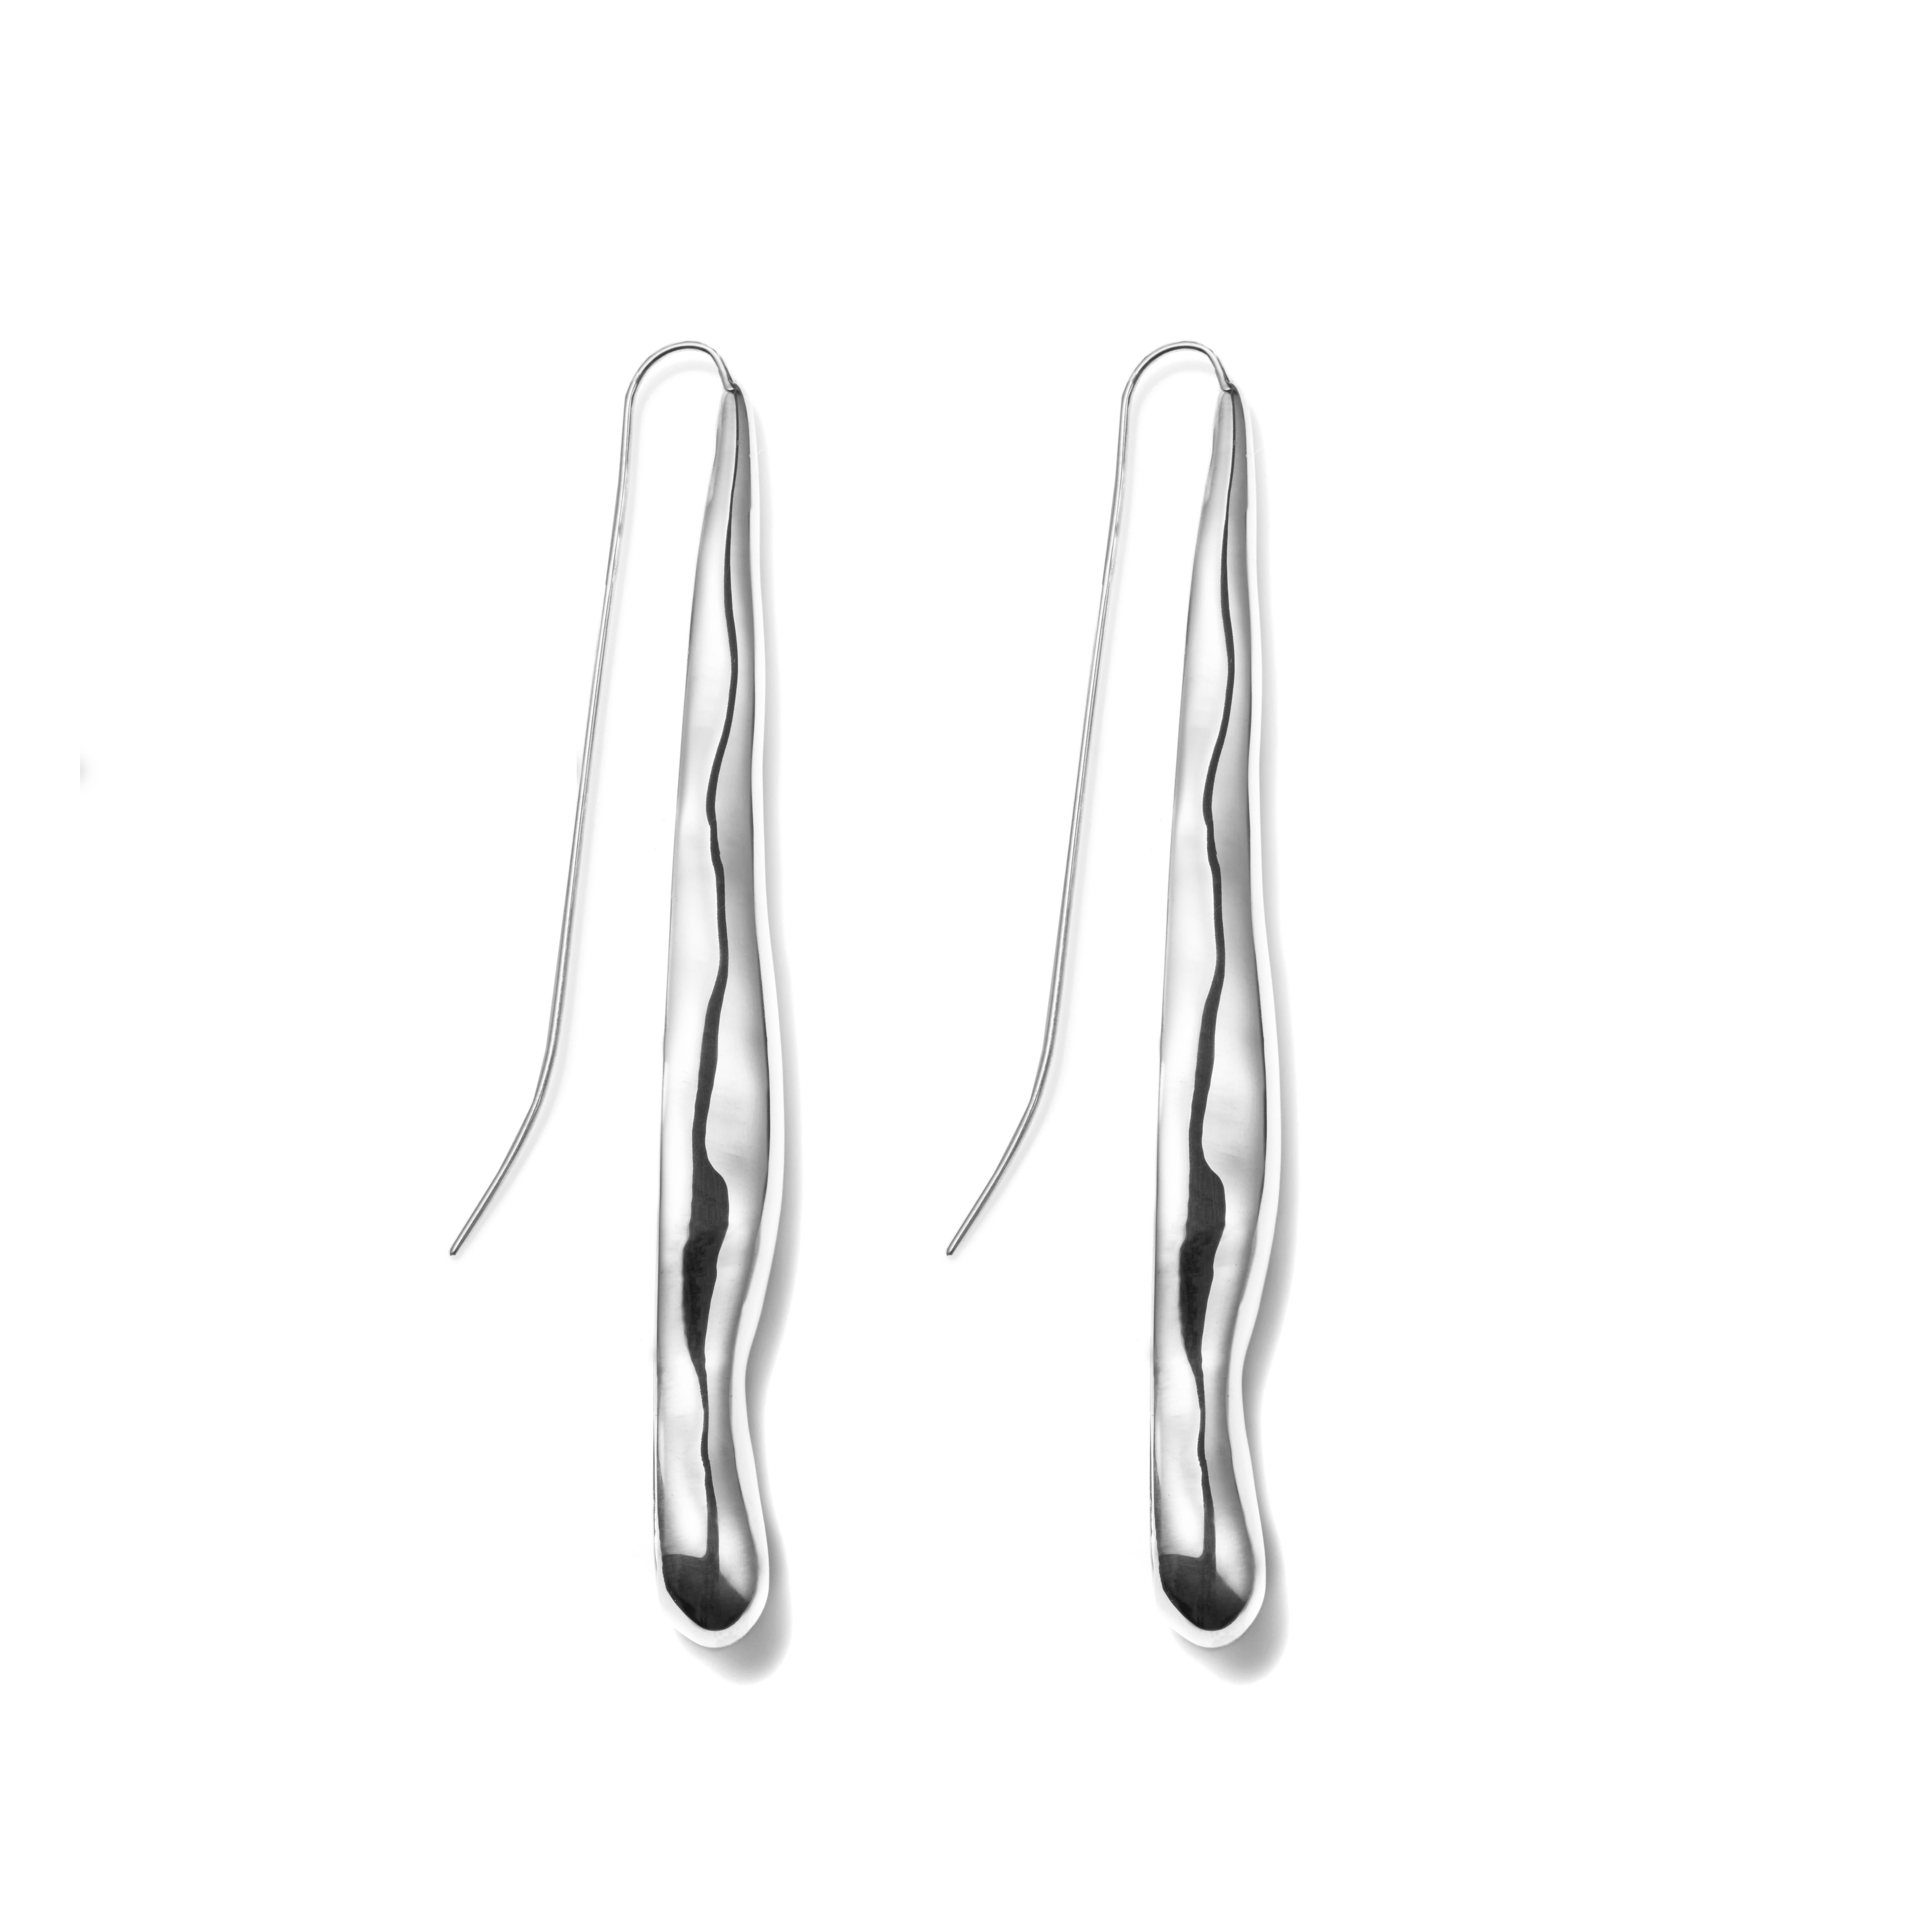 AGMES Sterling Silver Long Drop Sculptural Organic Earrings.
Sterling Silver Wire Back.
Also available in Gold Vermeil.  Kindly contact us if interested for further information.
Handmade in NYC.  
Inspired by urban landscapes, architecture and